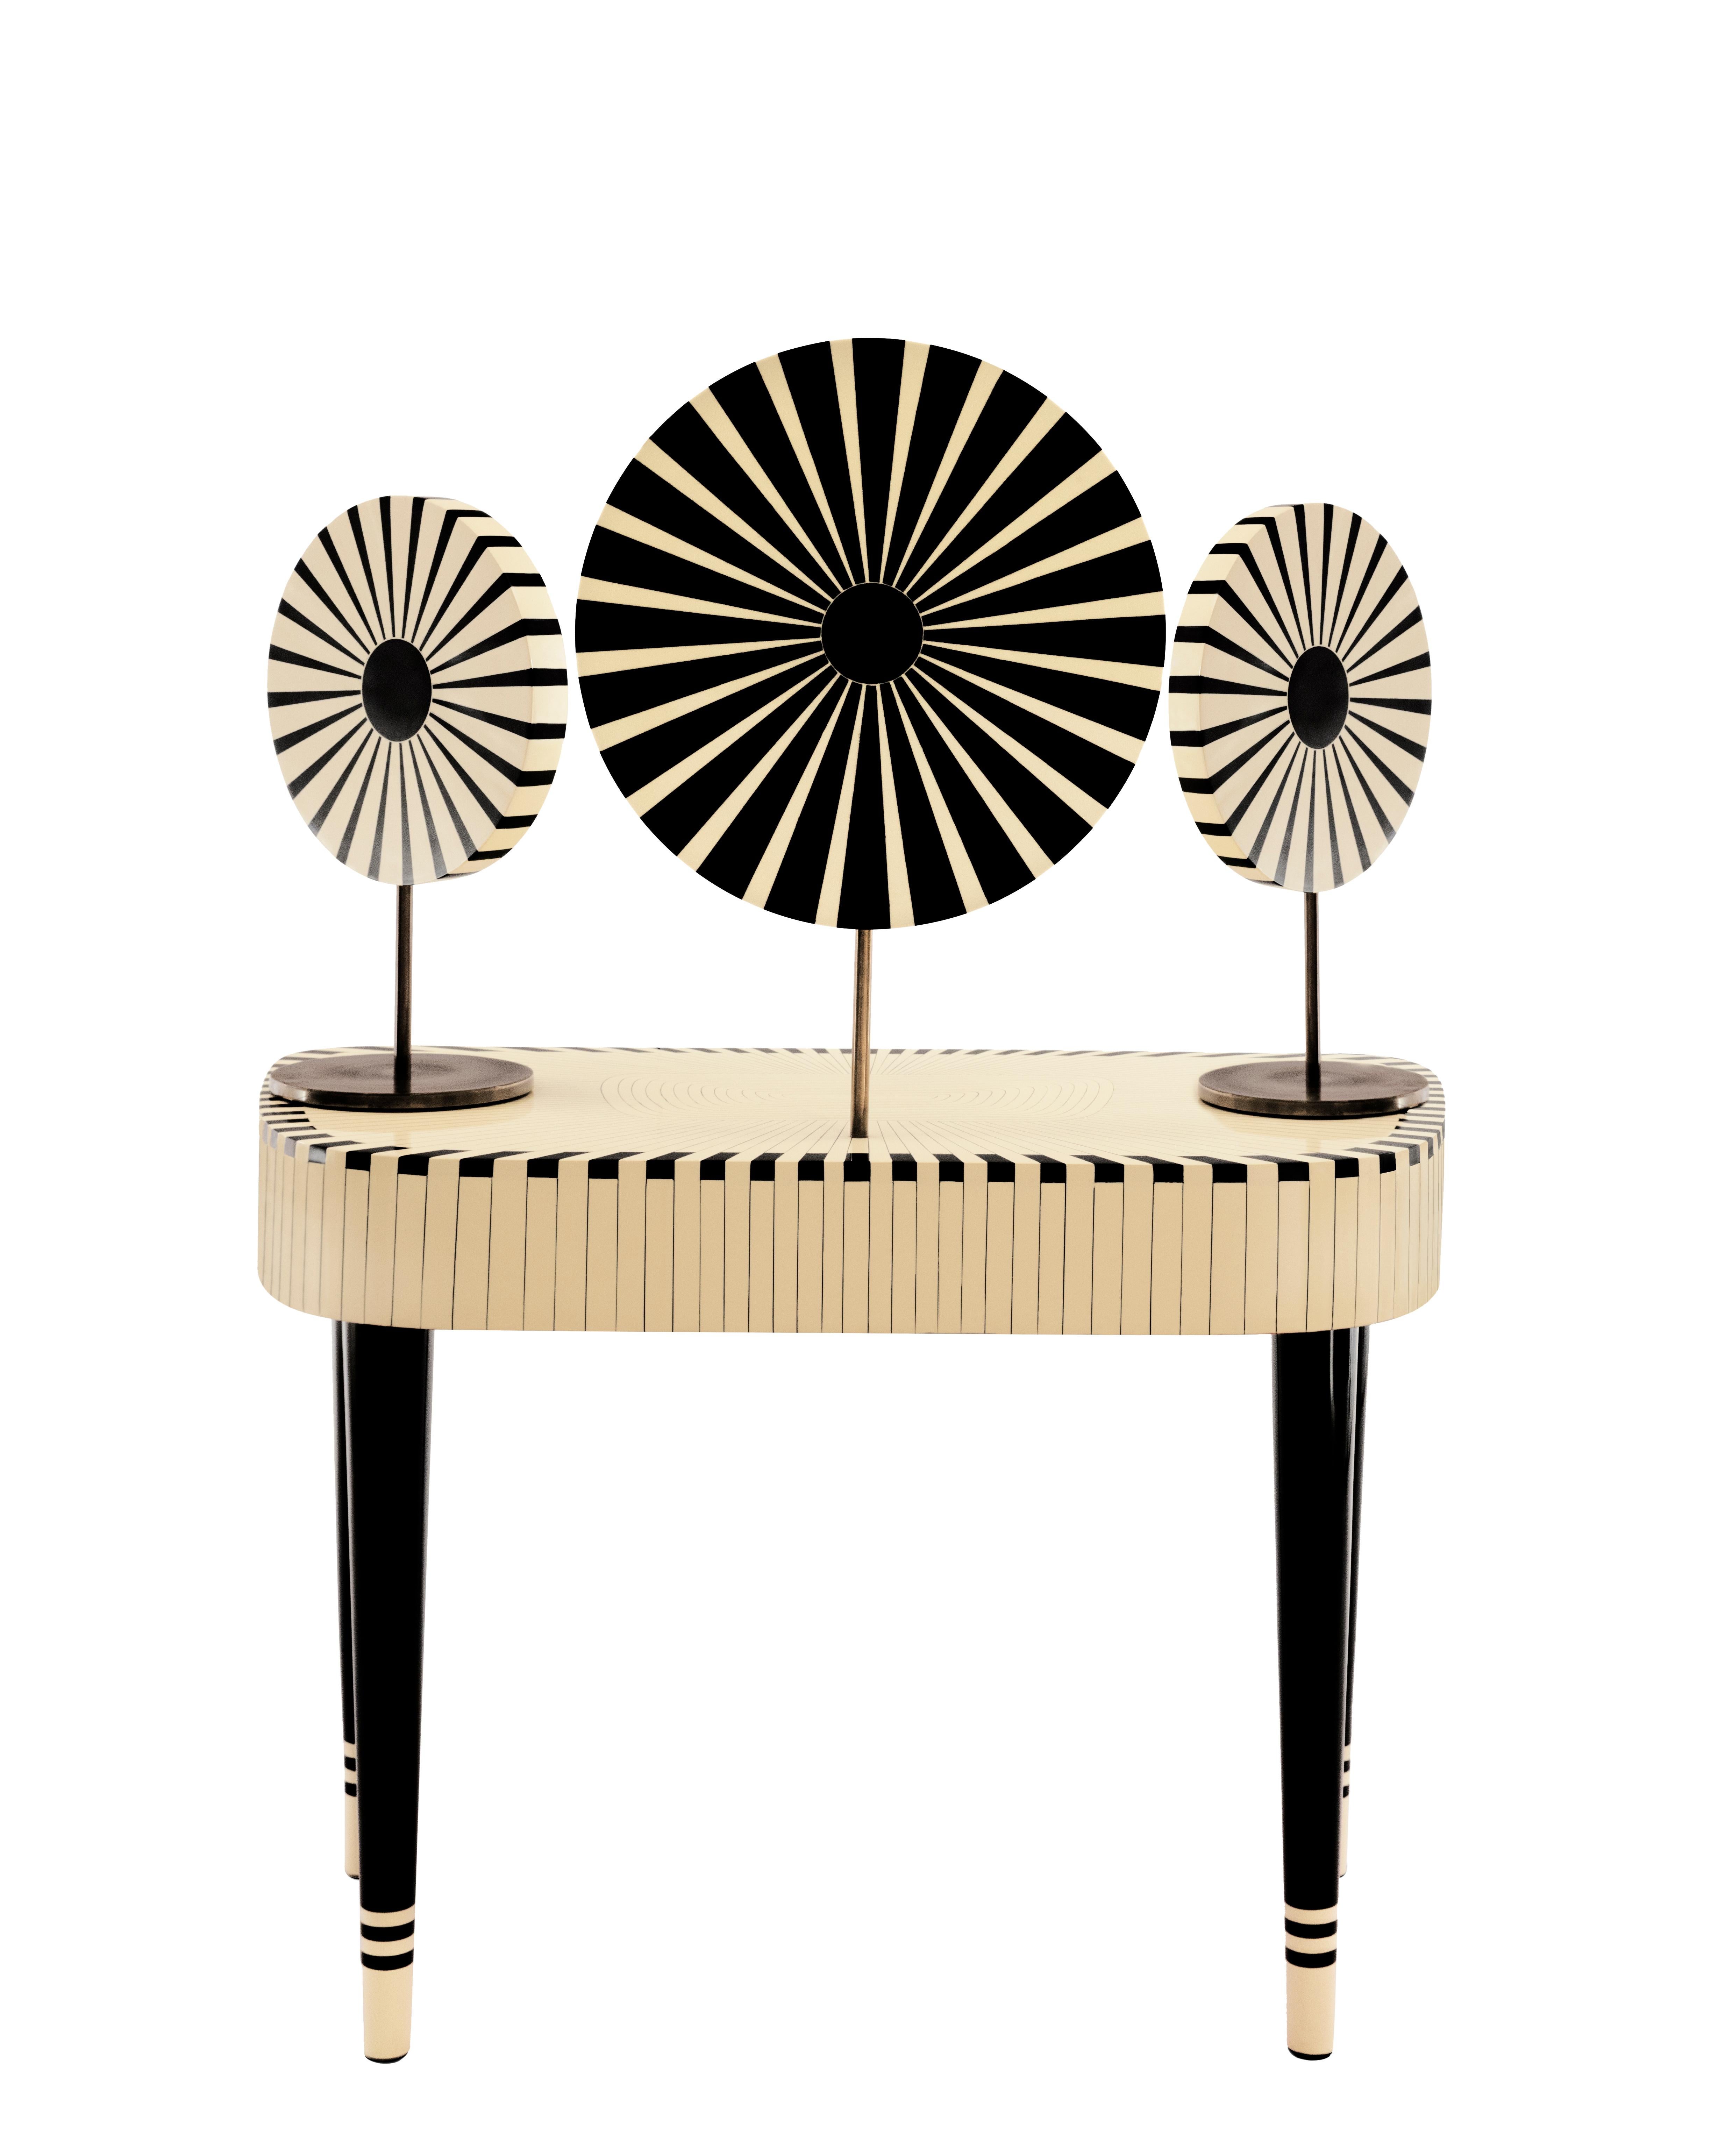 Woman in Paris Black and White Vanity Table by Matteo Cibic is a stunning dressing table with two drawers and three mirrors, two of which can be moved to desired angles. It is available in a range of colors, which can be customized according to the